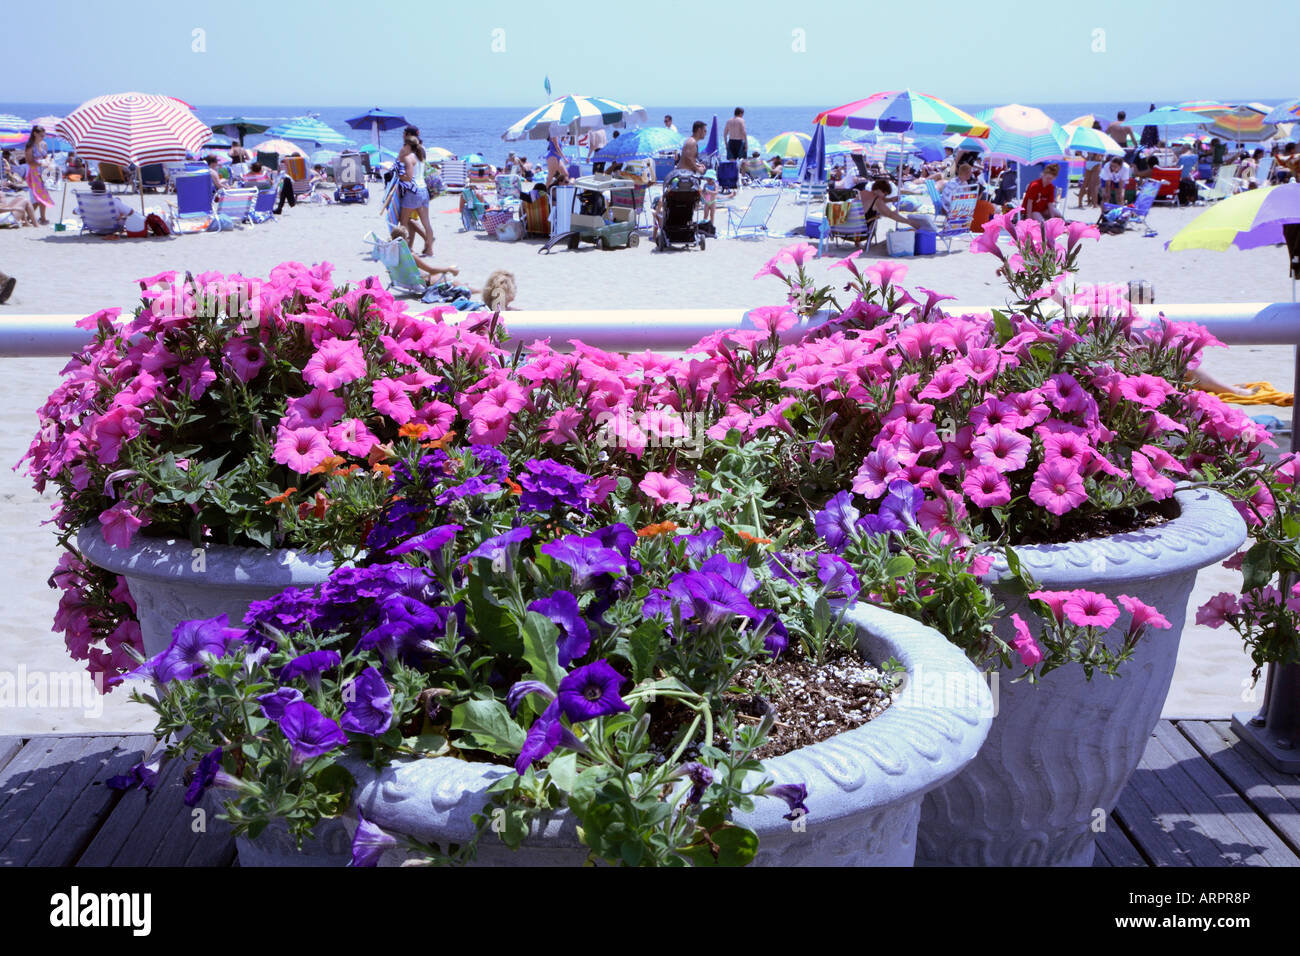 Three pots of colorful flowering petunias with boardwalk rail behind and sand with mass of colorful beach paraphernalia behind Stock Photo